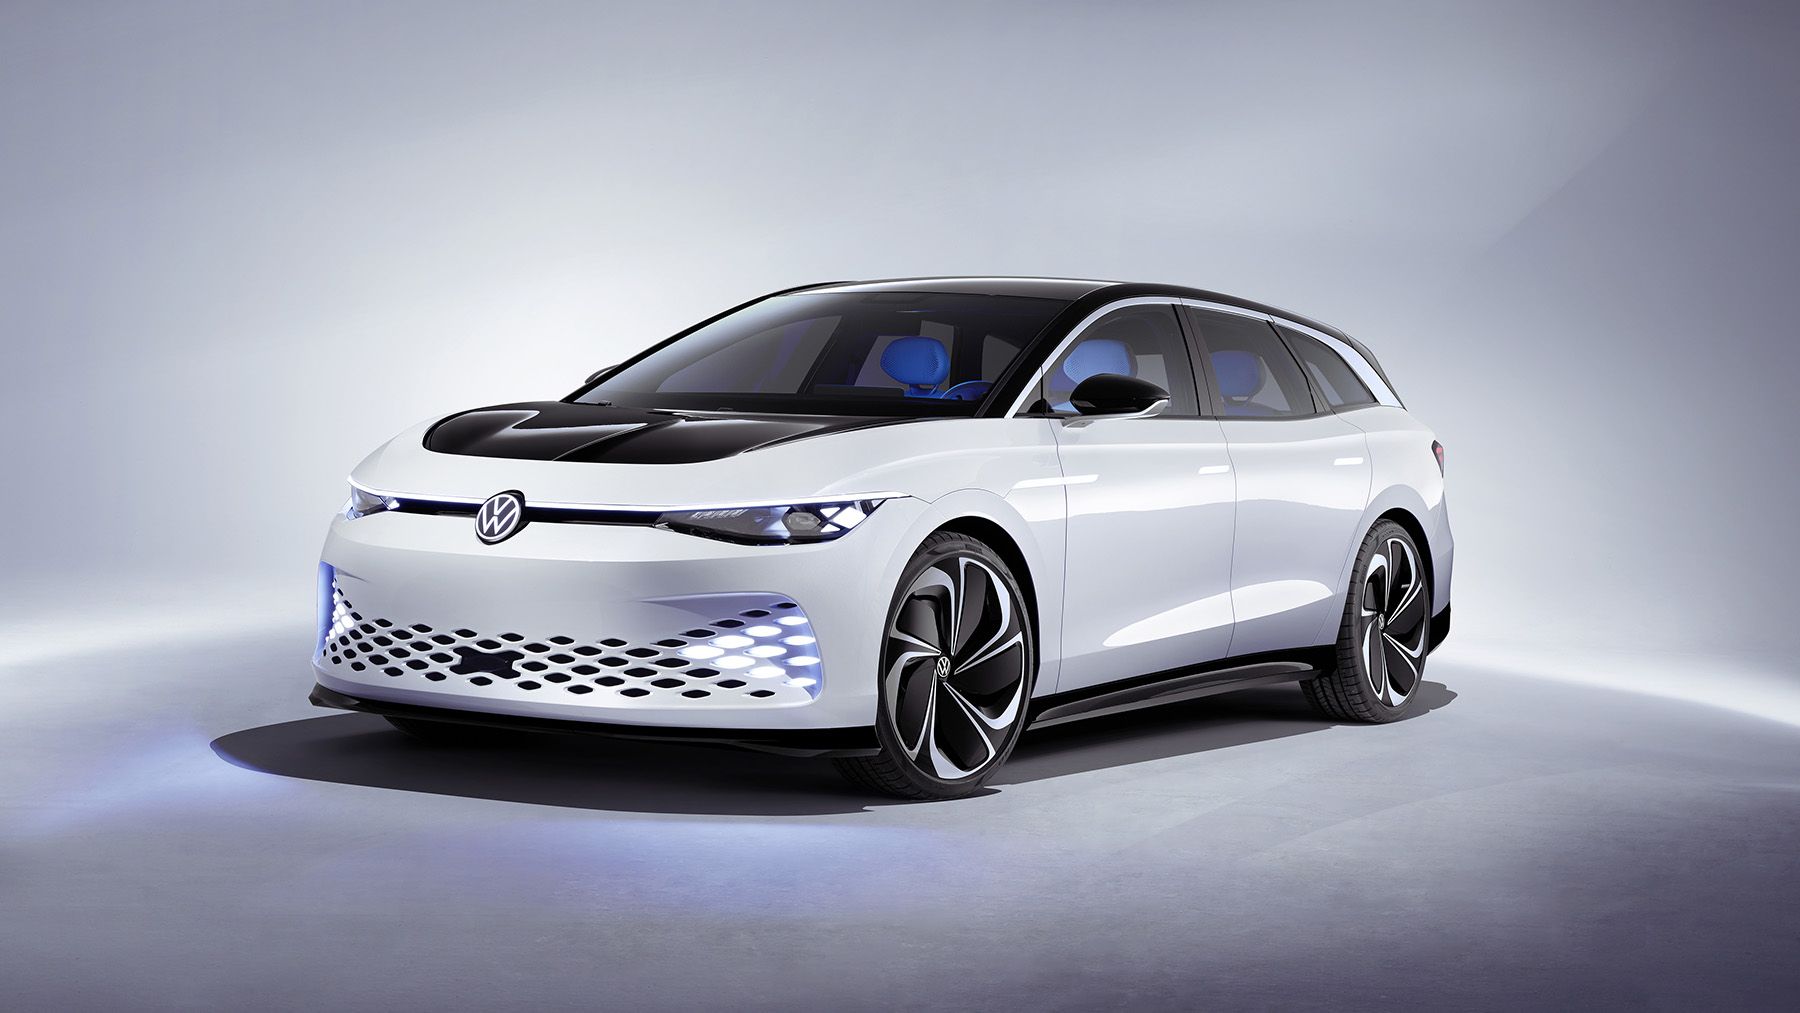 Here's When We'll See the First EV Station Wagon